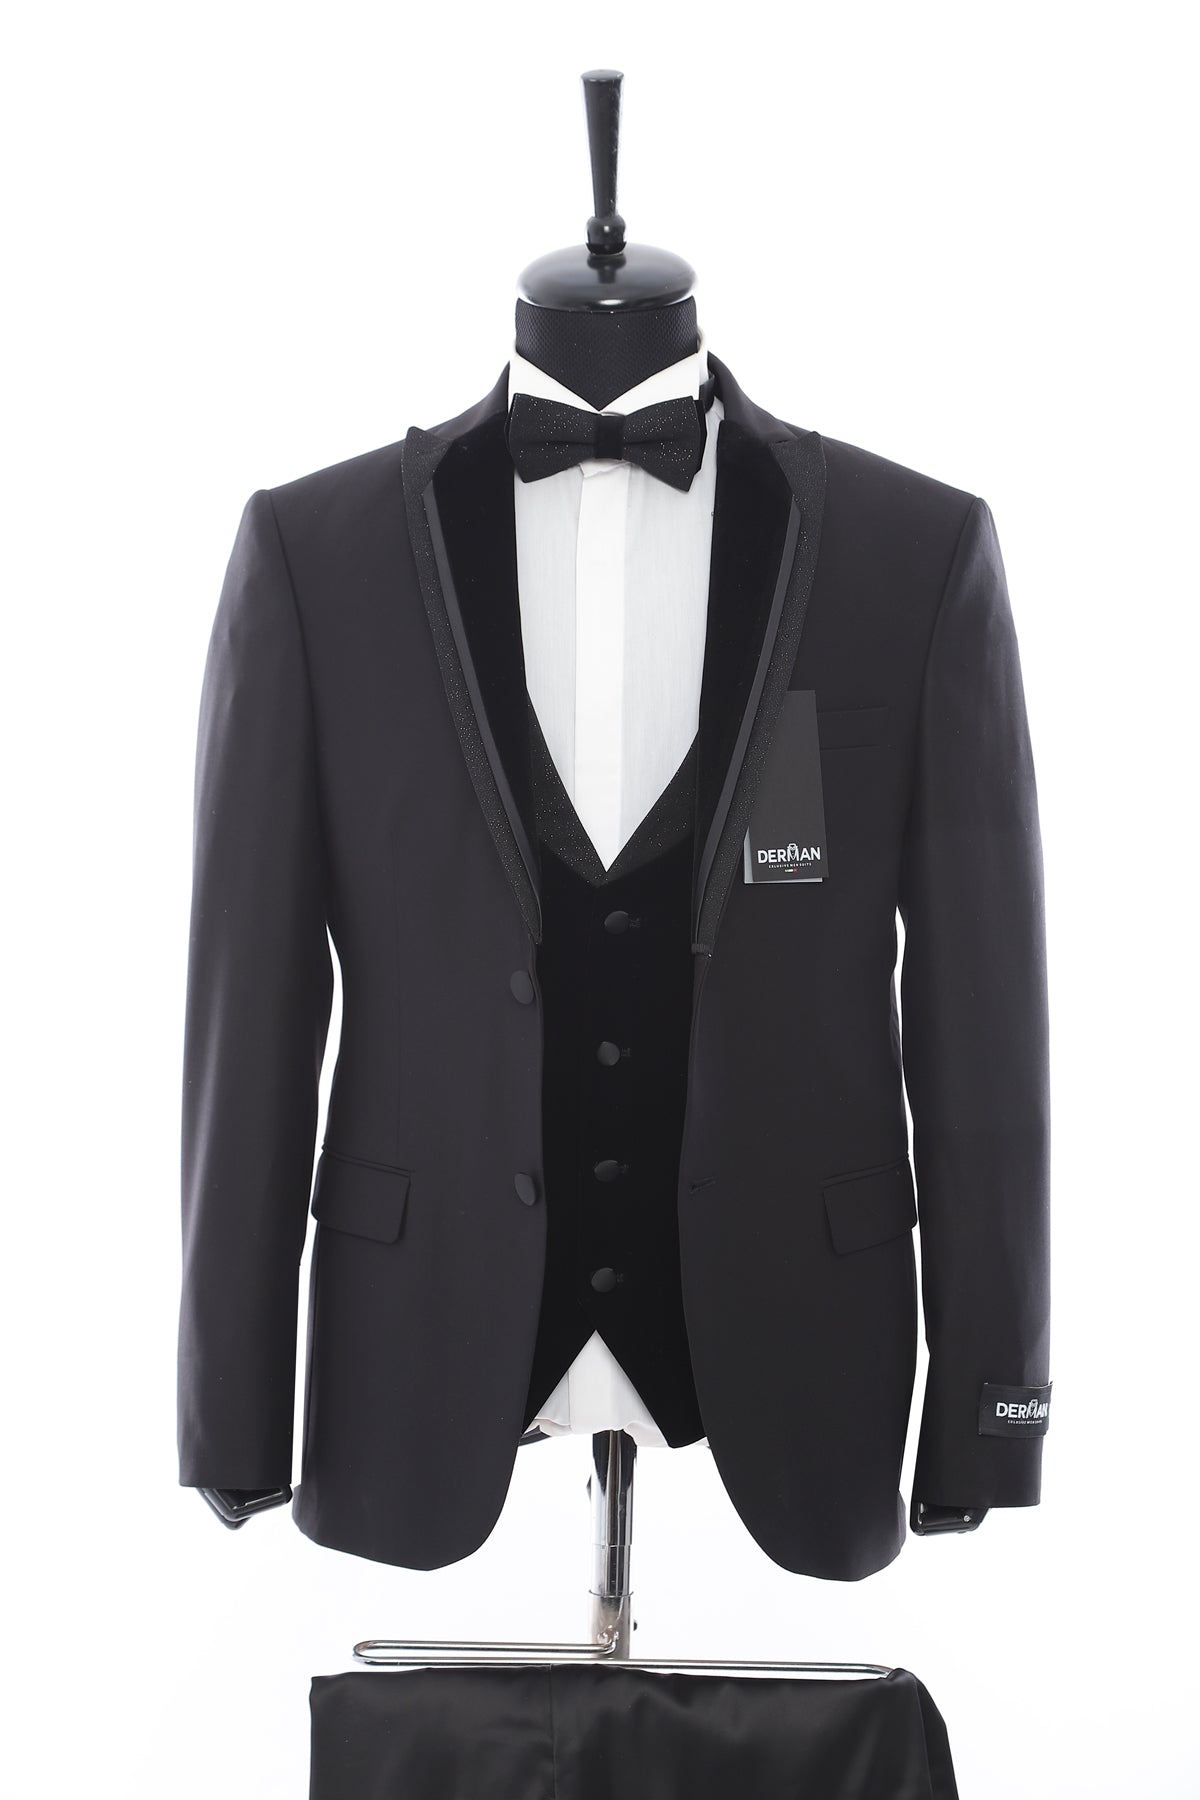 Double Breasted Classic Silvery Collar Black Tuxedo